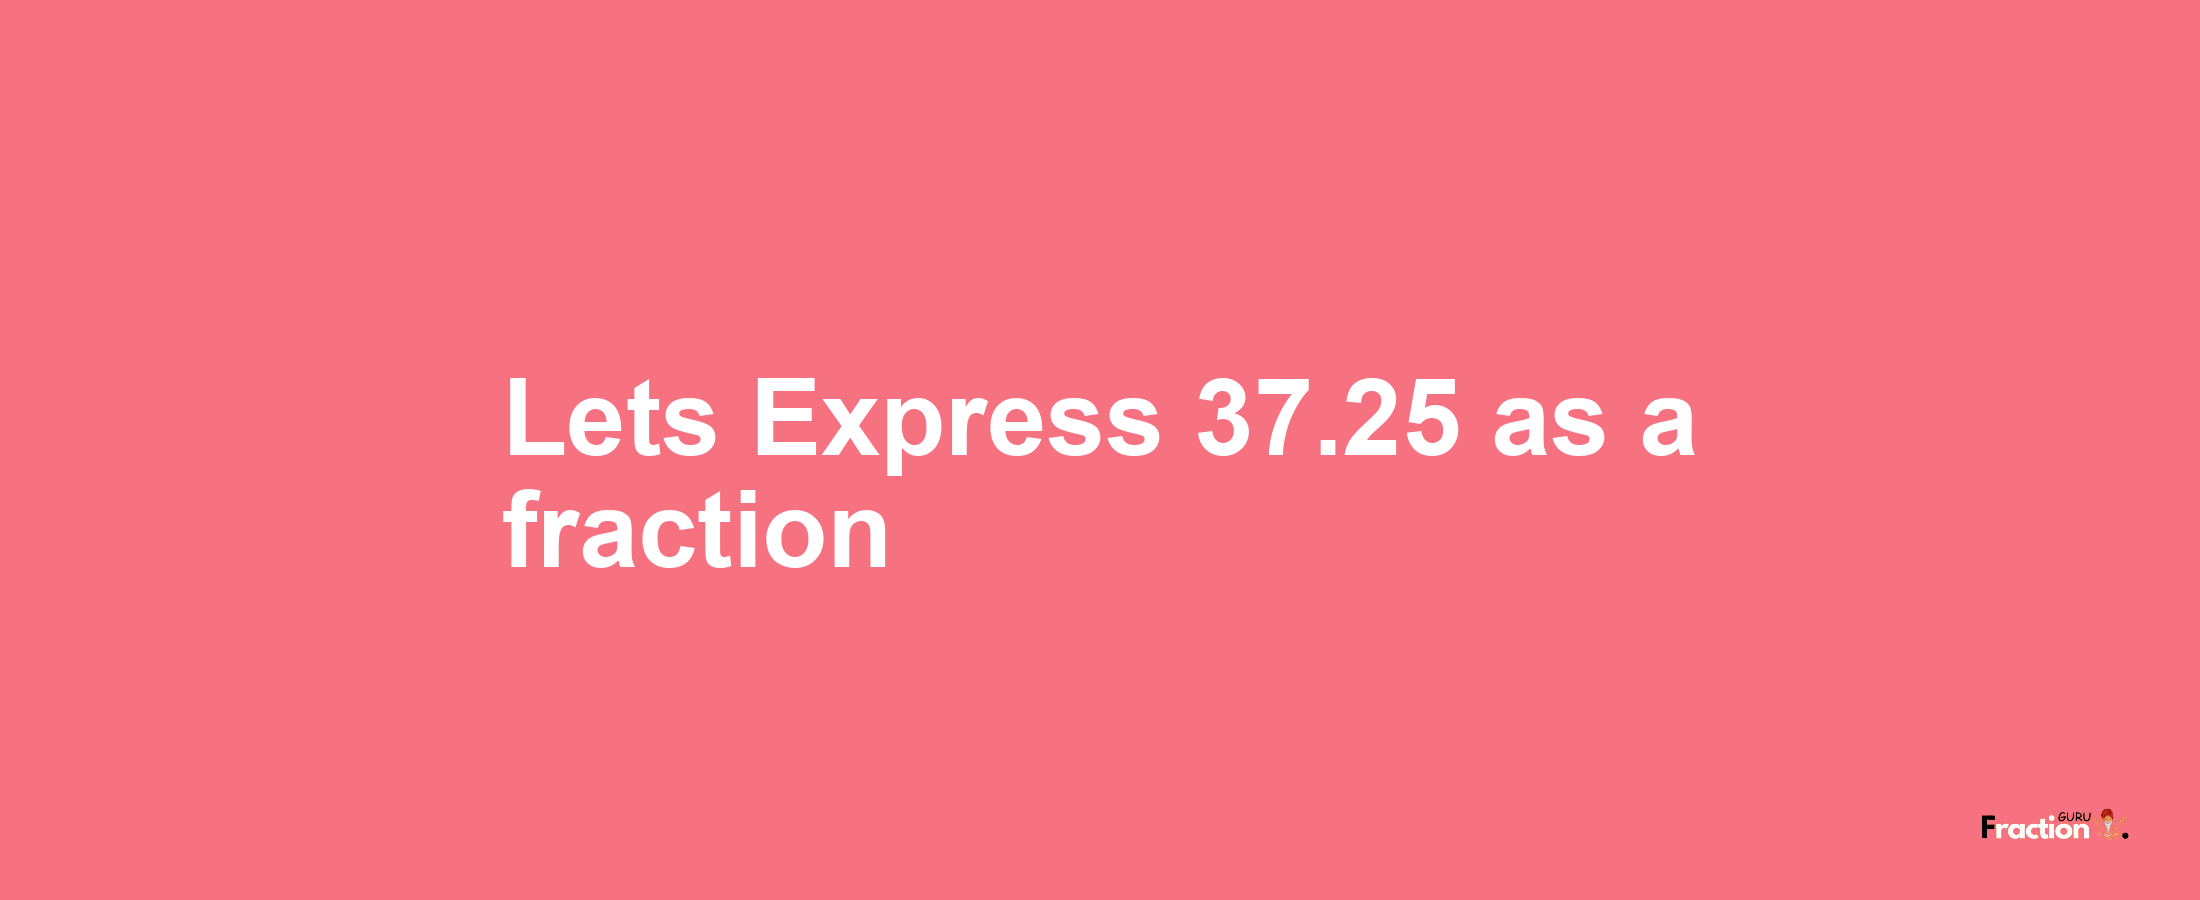 Lets Express 37.25 as afraction